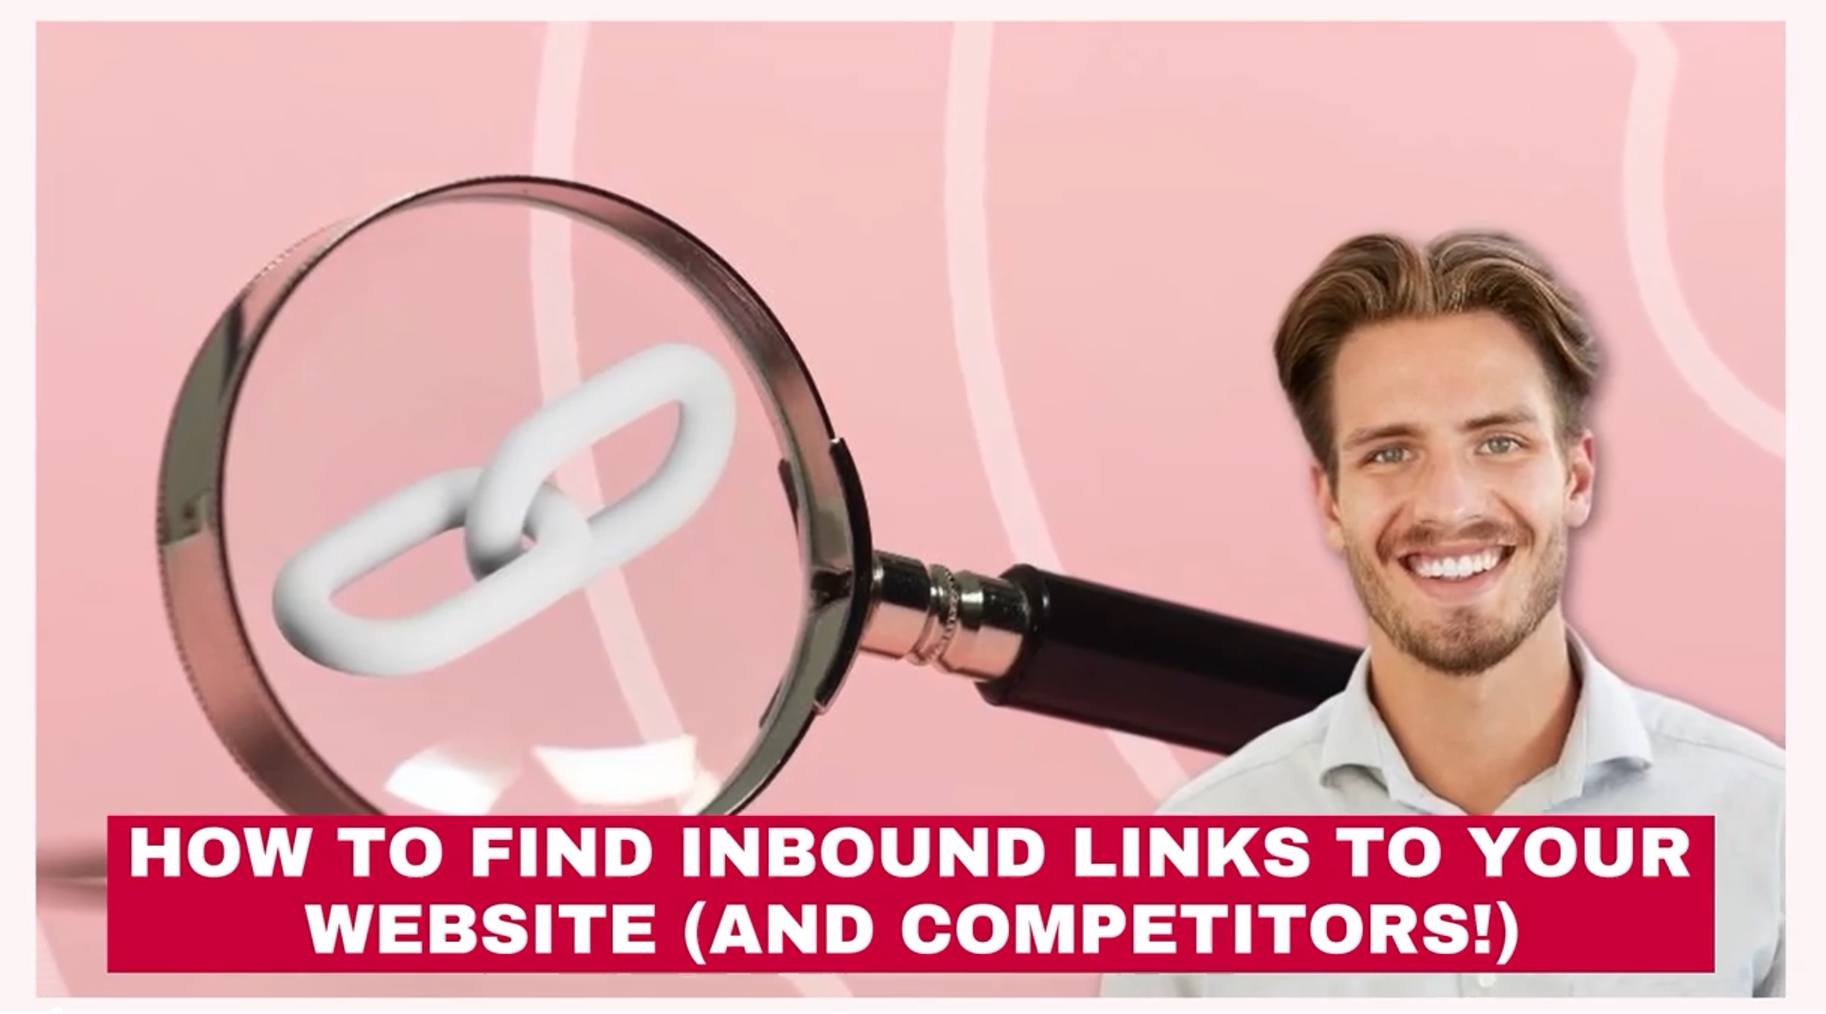 How to Find Inbound Links to Your Website (and Competitors!)